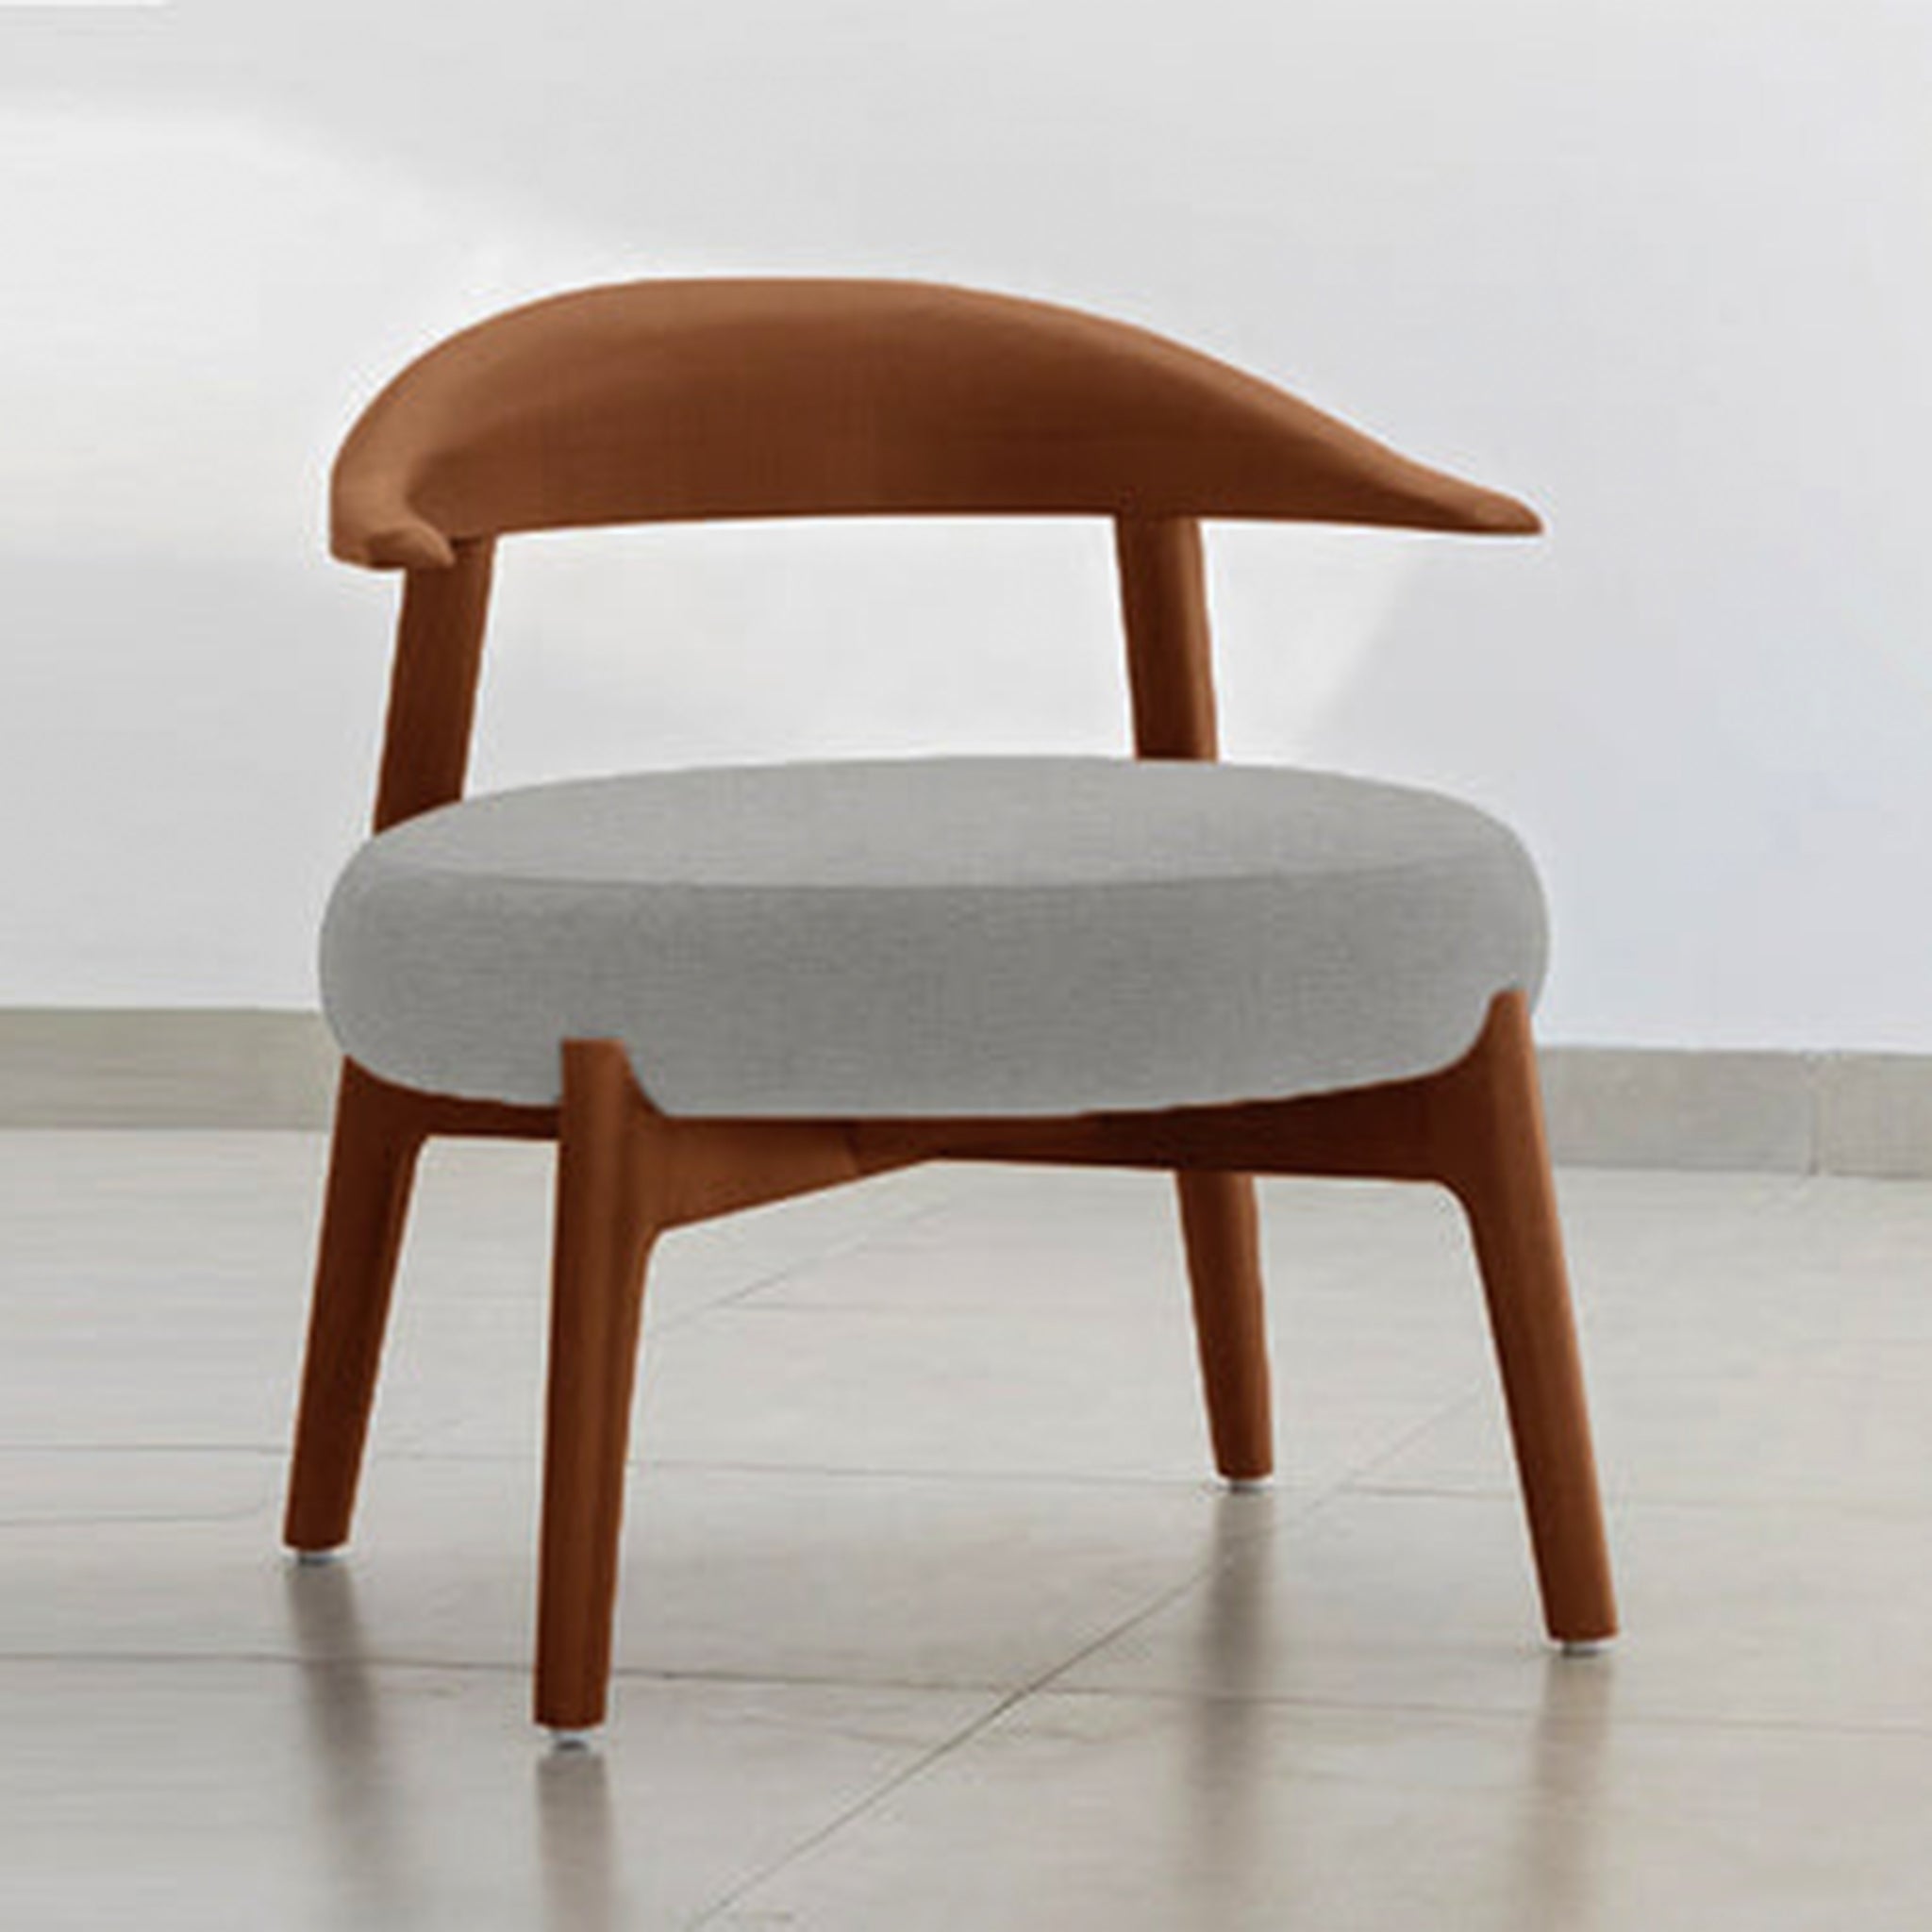 "The Hyde Accent Chair with sleek wooden backrest and plush seating"